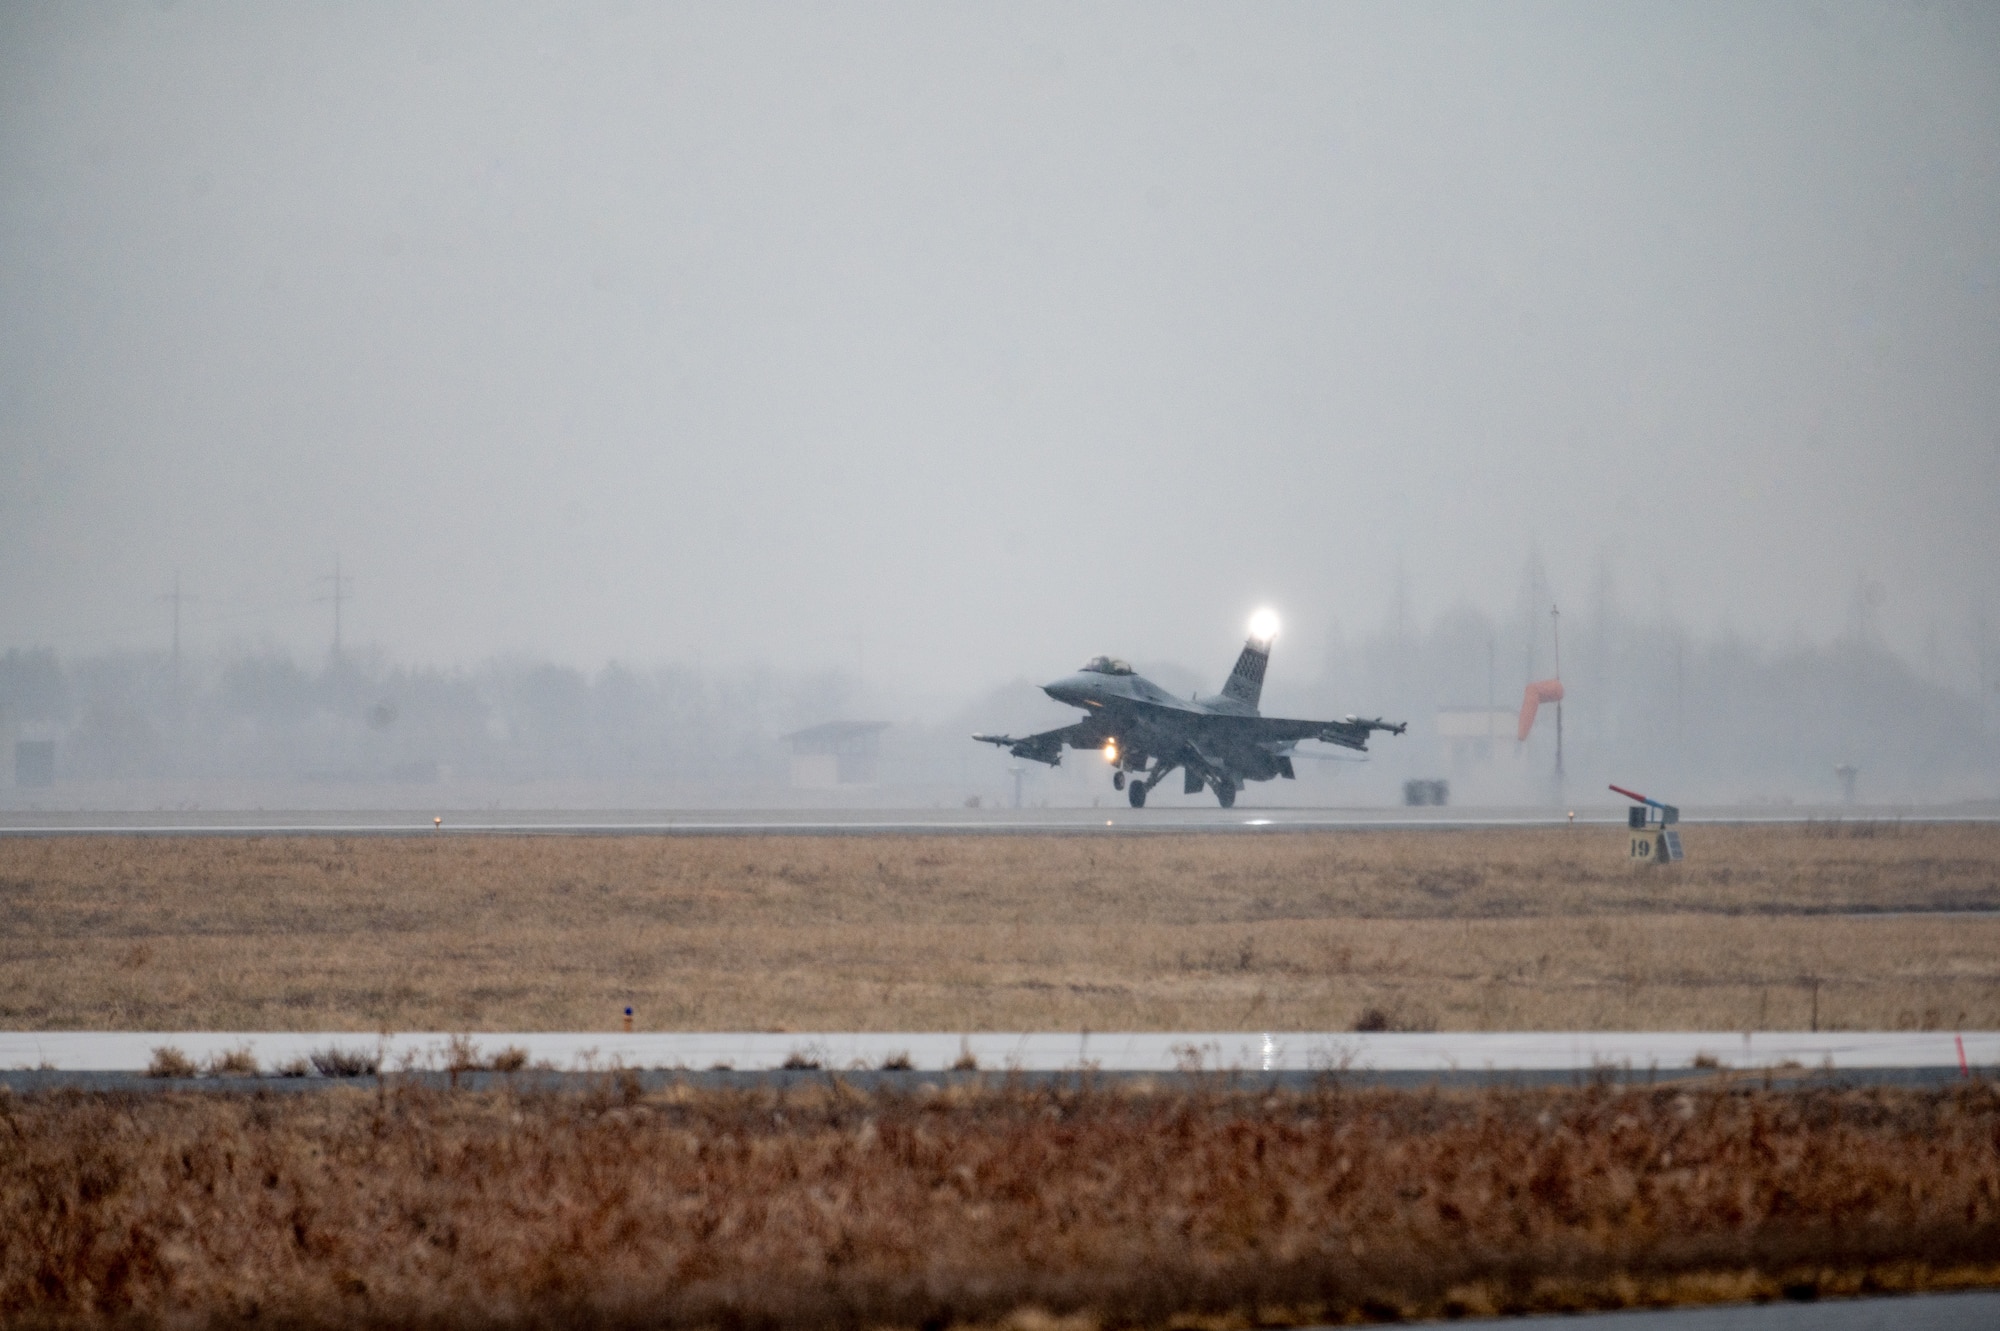 A U.S. Air Force F-16 Fighting Falcon lands at Osan Air Base, Republic of Korea, Jan. 9, 2024. The 36th Fighter Squadron conducts regular training during every day operations ensuring that the F-16s and pilots are ready to fly at all times to carry out the “Fight Tonight” mission. (U.S. Air Force photo by Airman 1st Class Chase Verzaal)